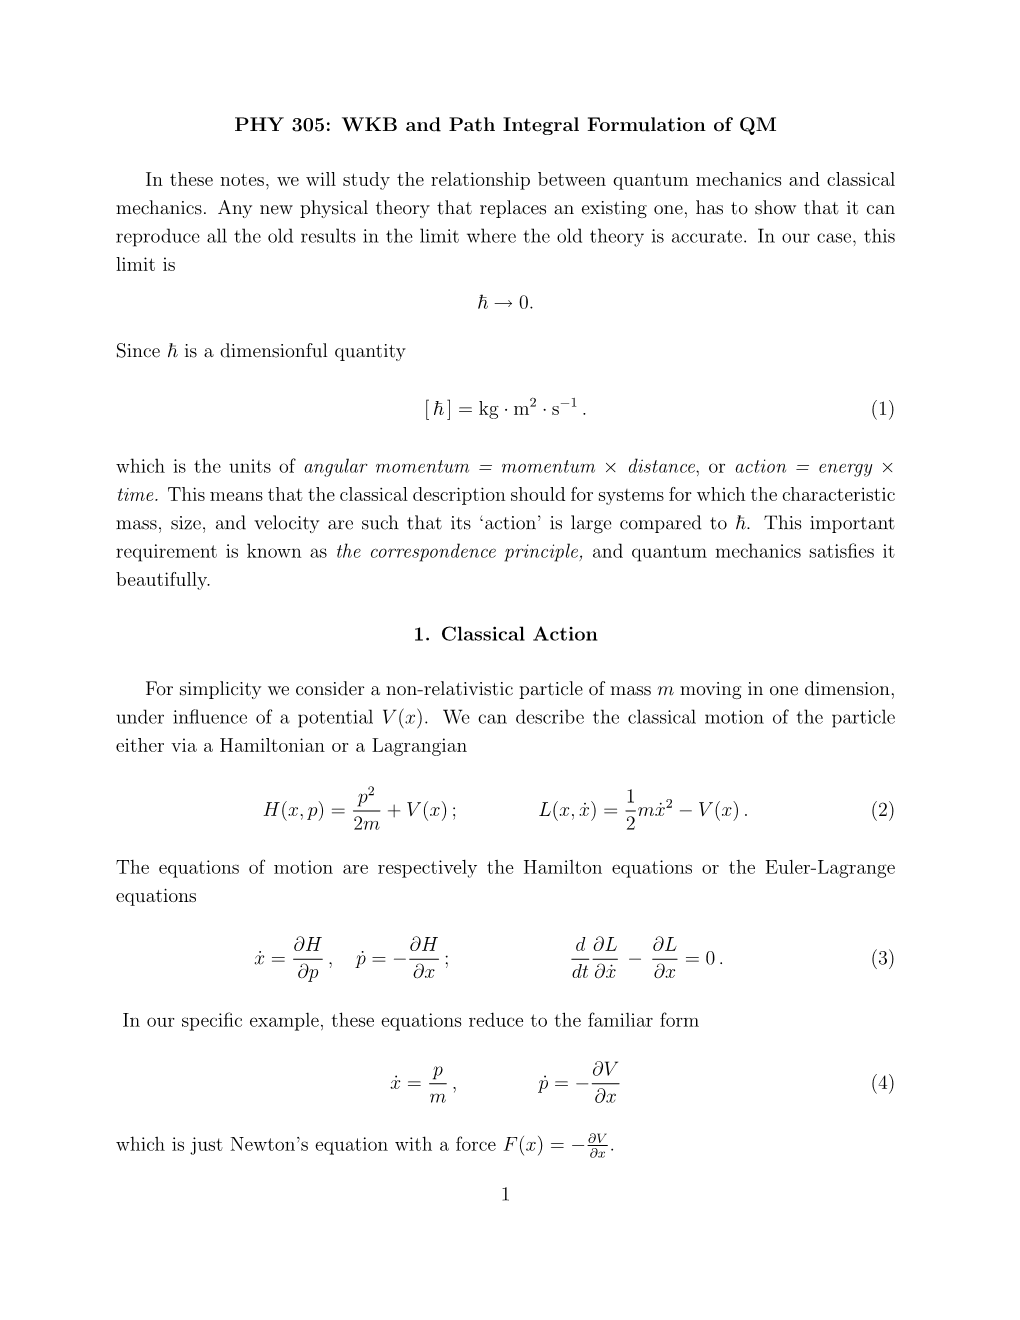 PHY 305: WKB and Path Integral Formulation of QM in These Notes, We Will Study the Relationship Between Quantum Mechanics and Cl